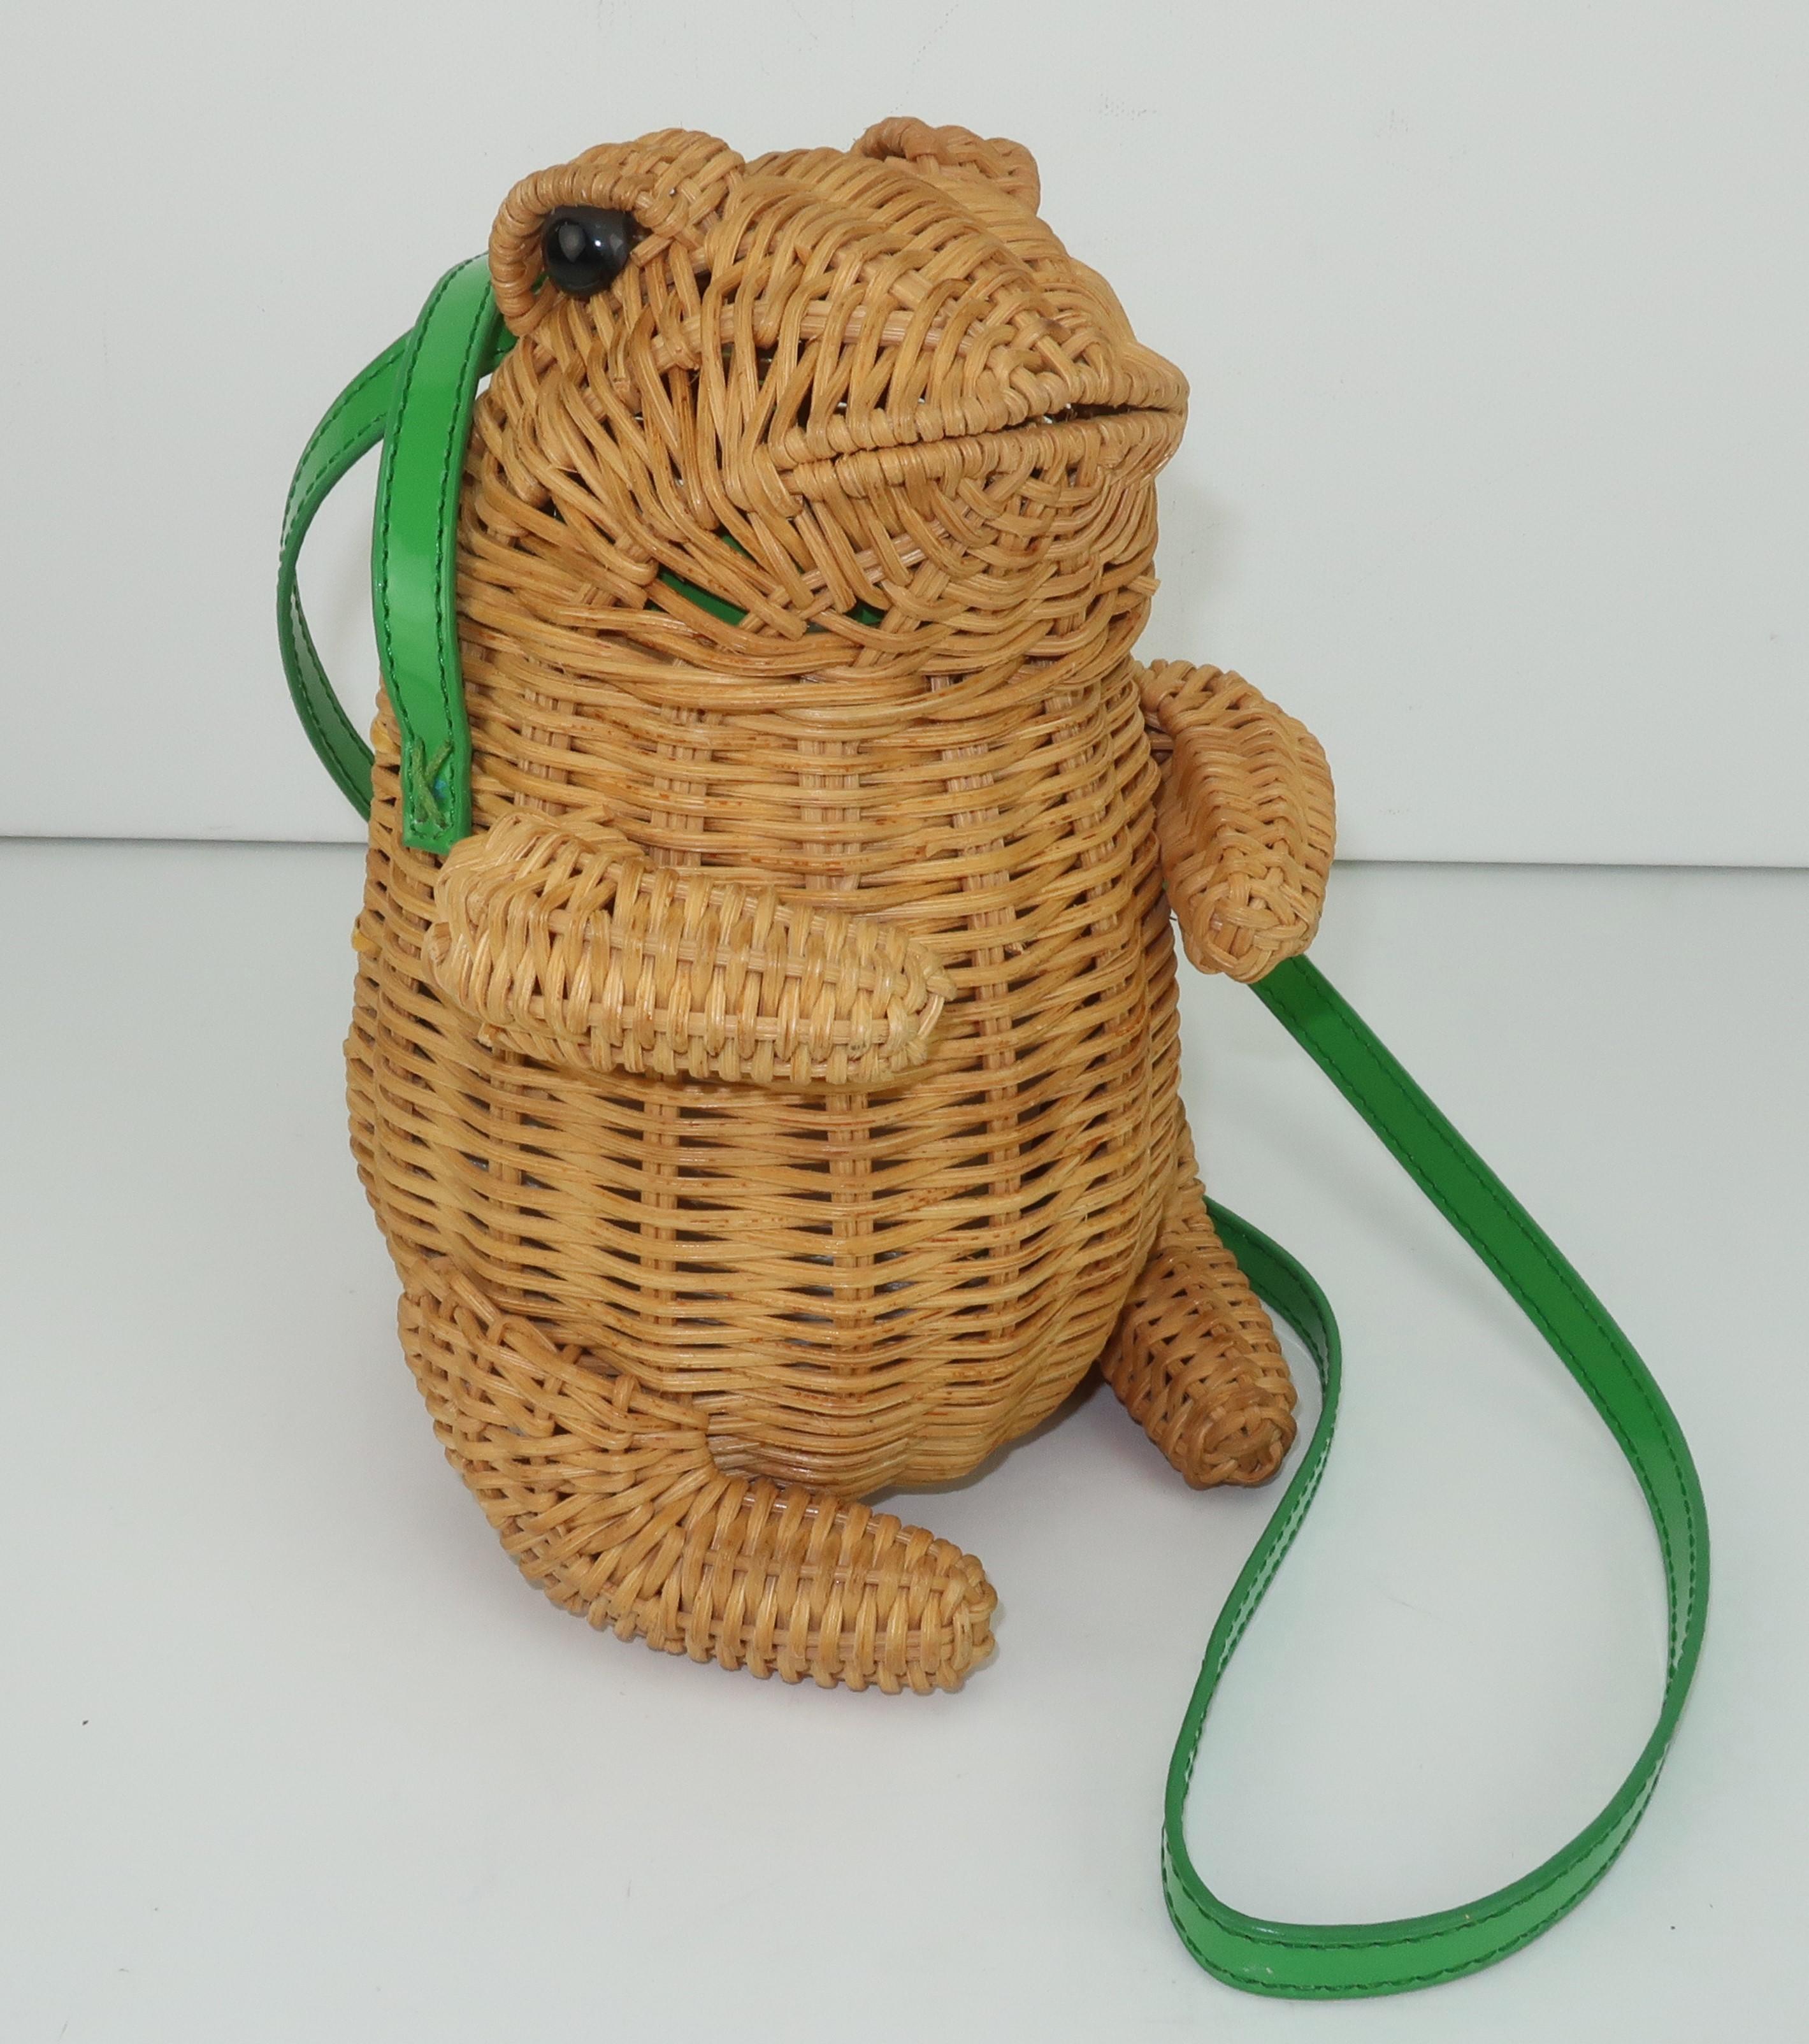 Natural wicker handbag in the shape of an adorable frog with green patent shoulder strap, glass eyes and a discreet trap door opening.  The interior is lined in green patent and the trap door closes with a metal button and green elastic.  He will